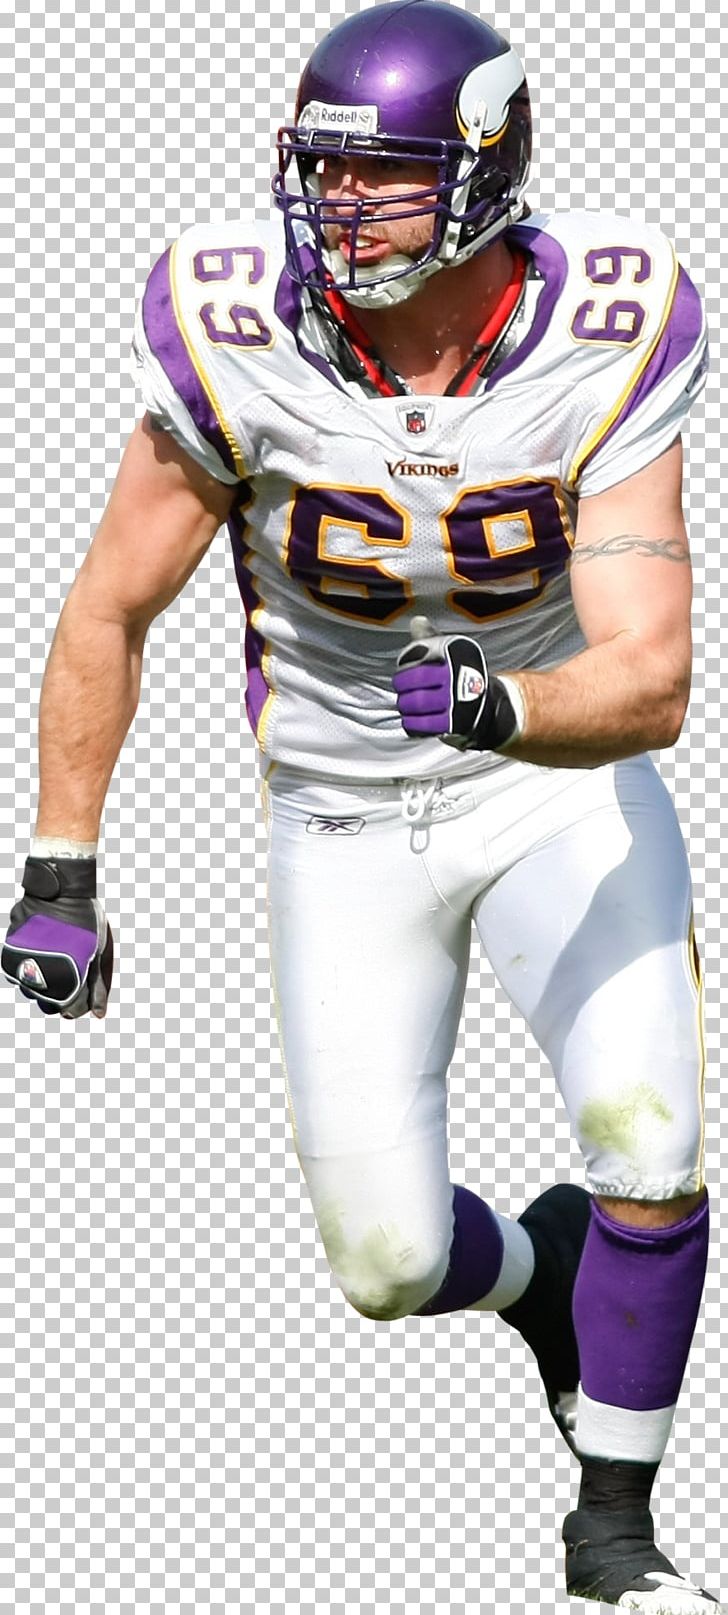 American Football Player PNG Image for Free Download